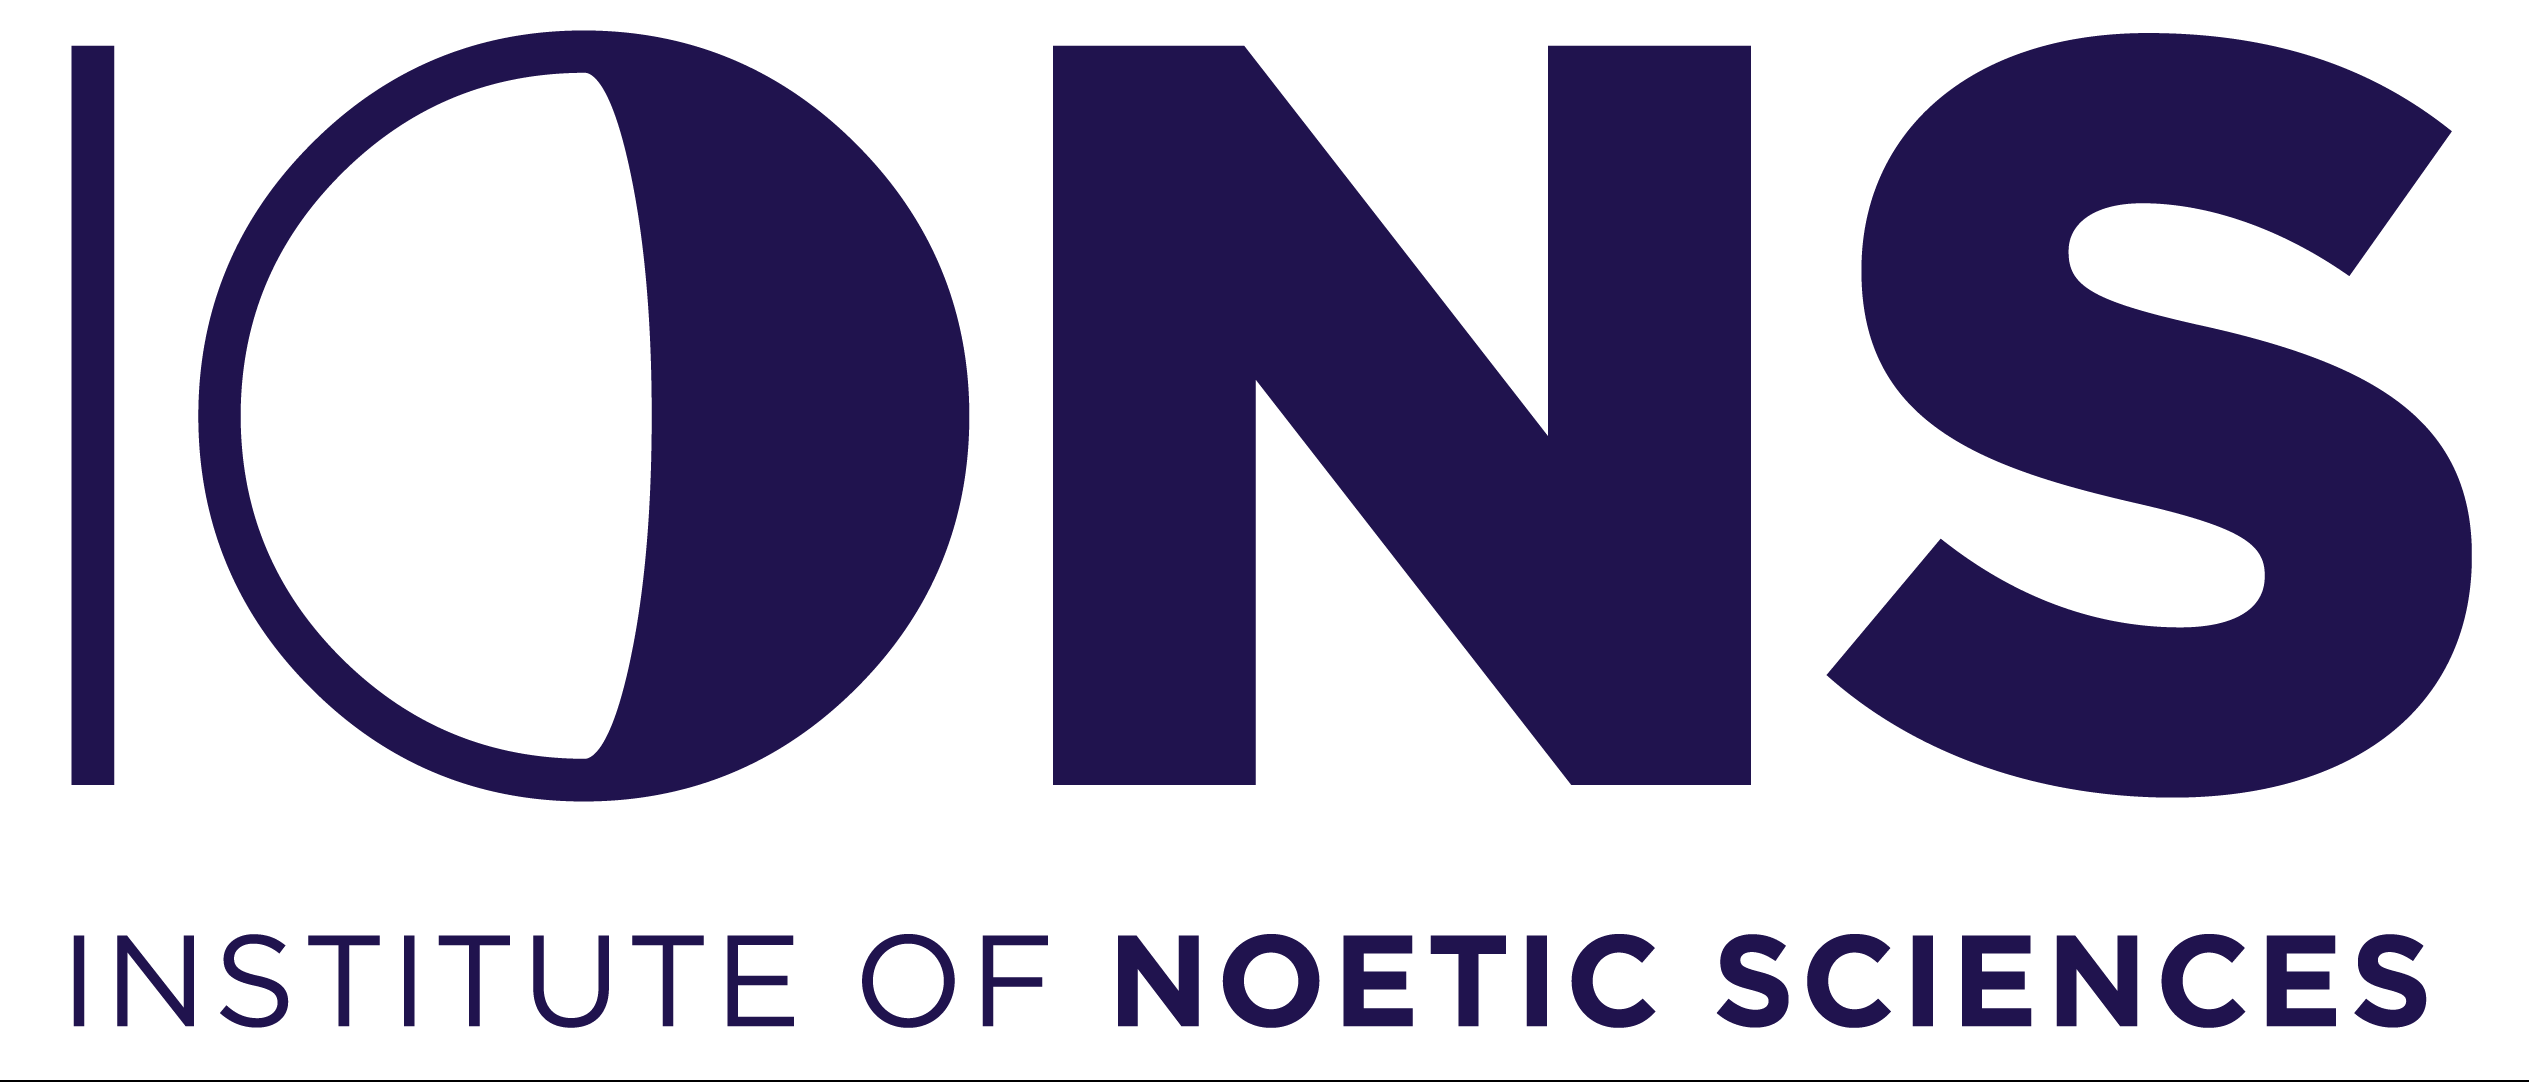 Institute of Noetic Sciences - The Science of What Connects Us
